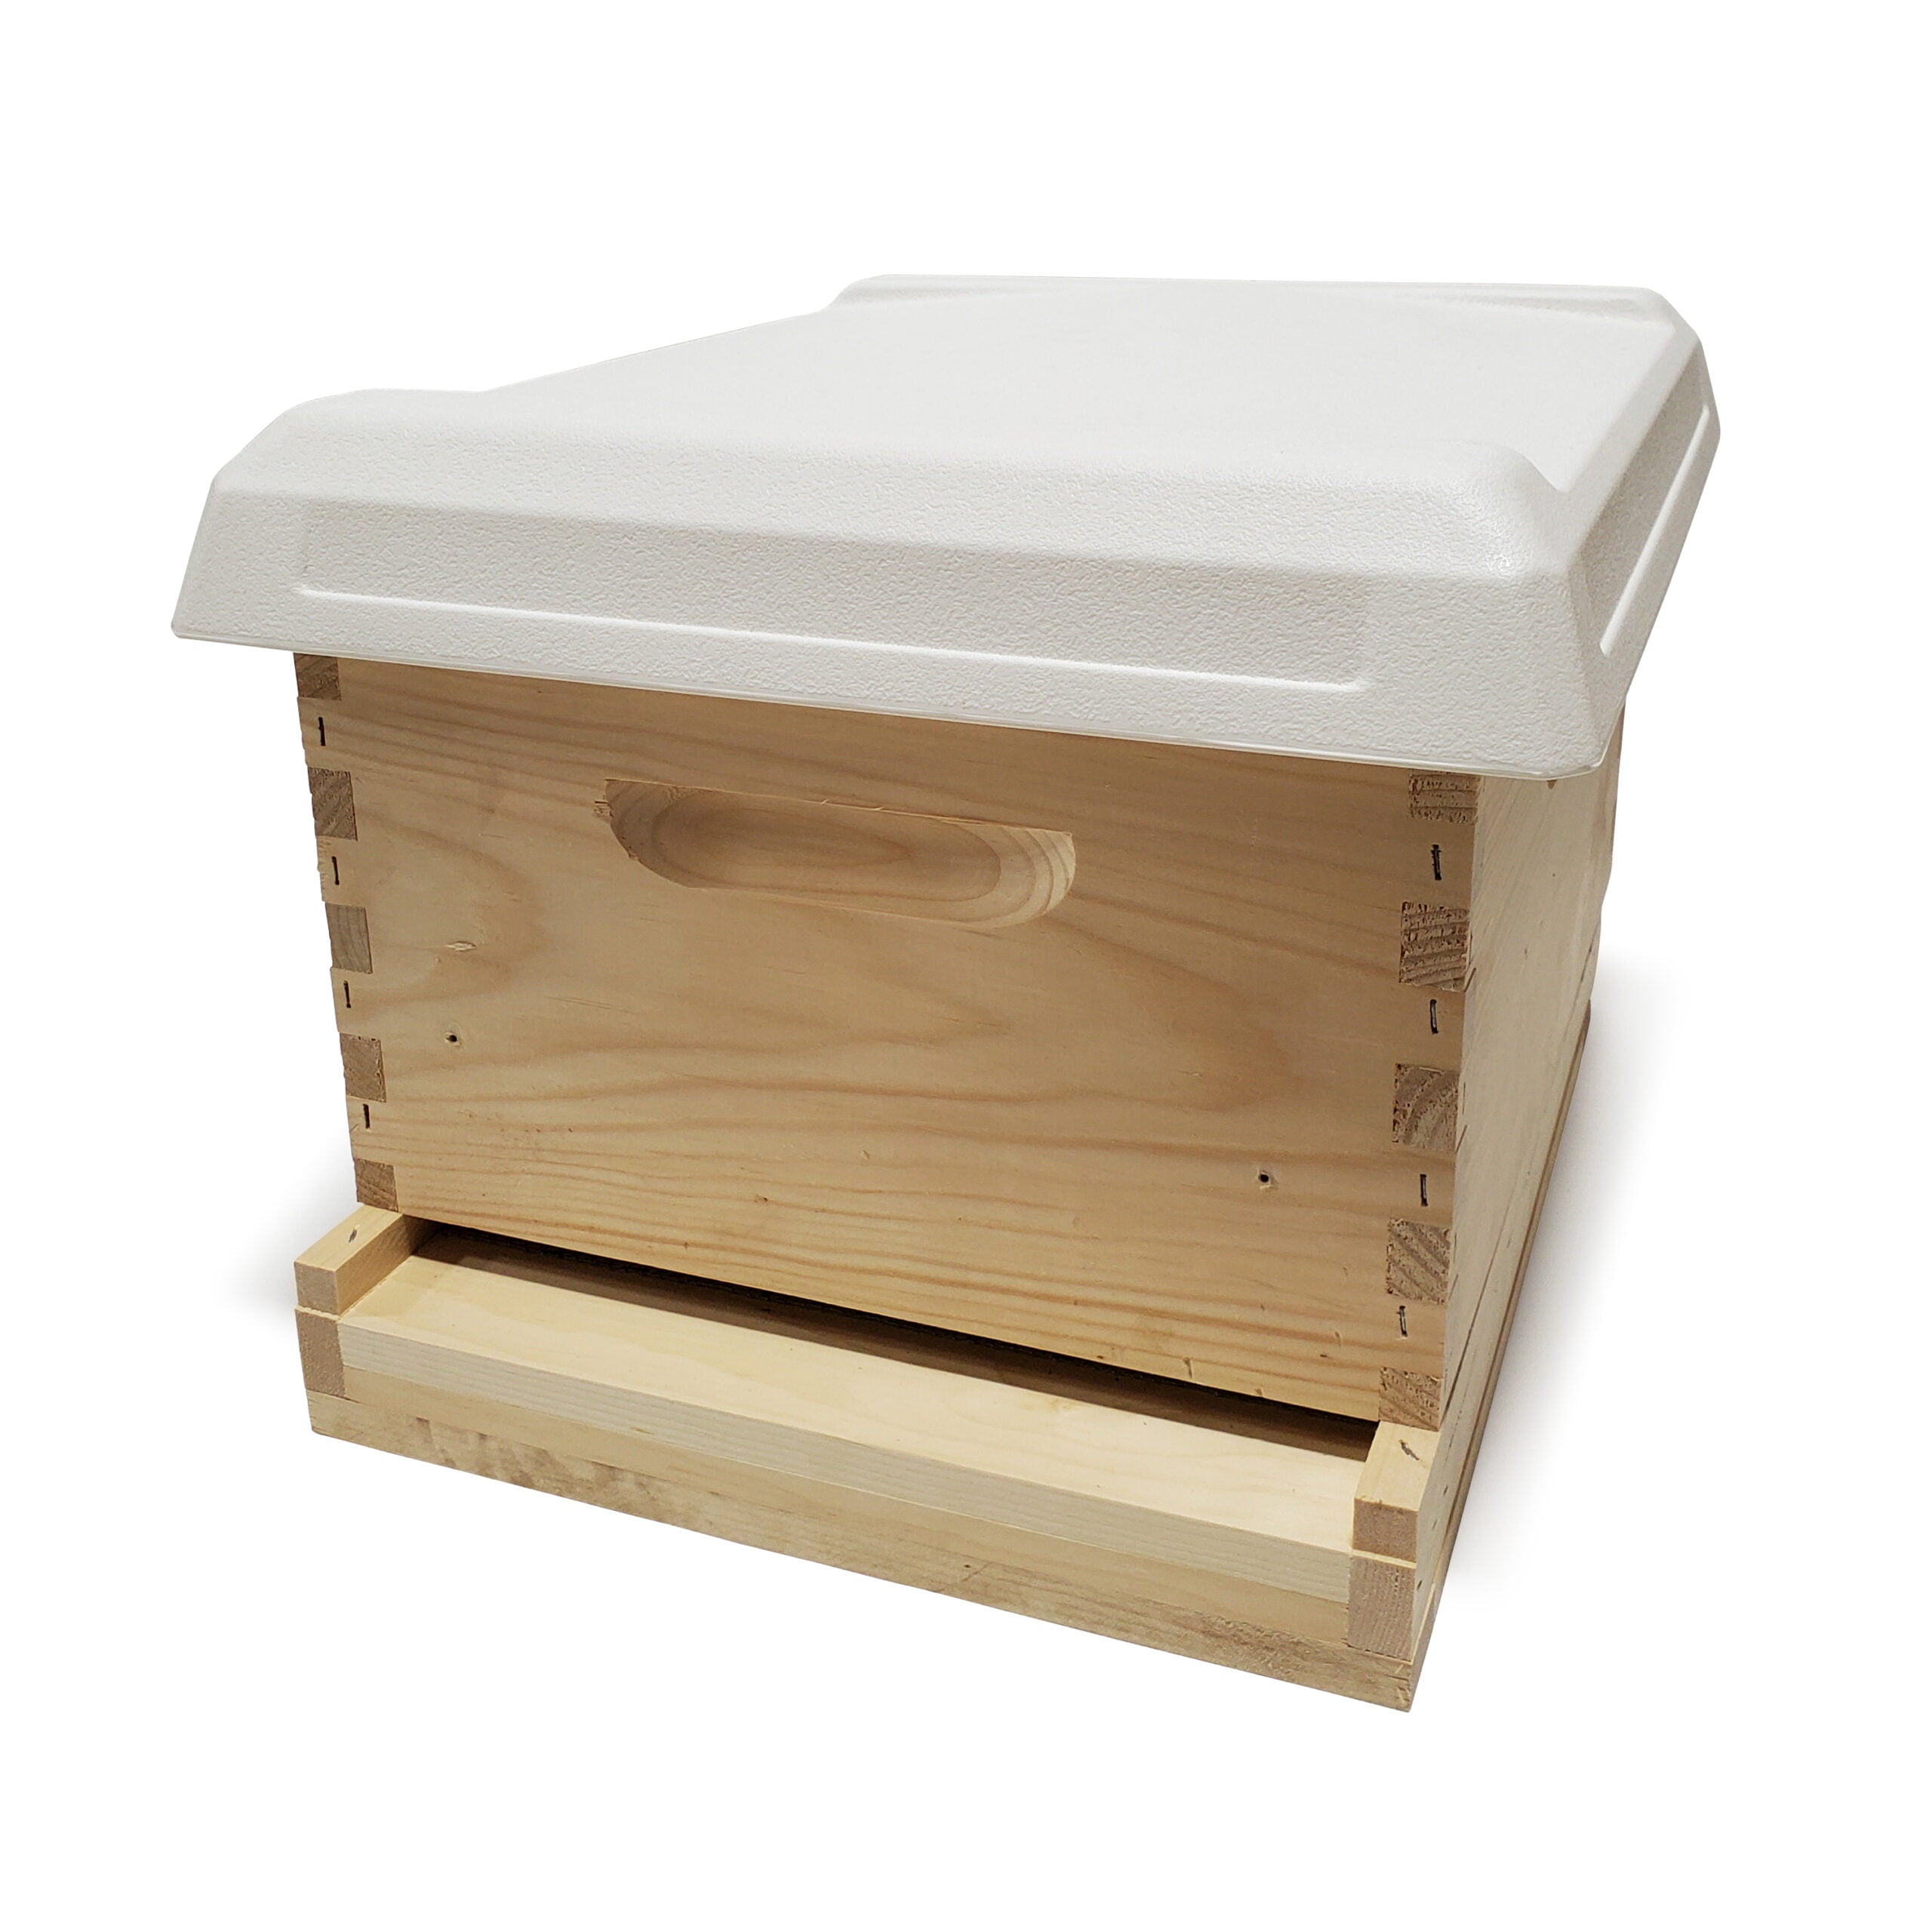 Maxima Plastic bee Hive Cover - 10 Frame for beekeeping